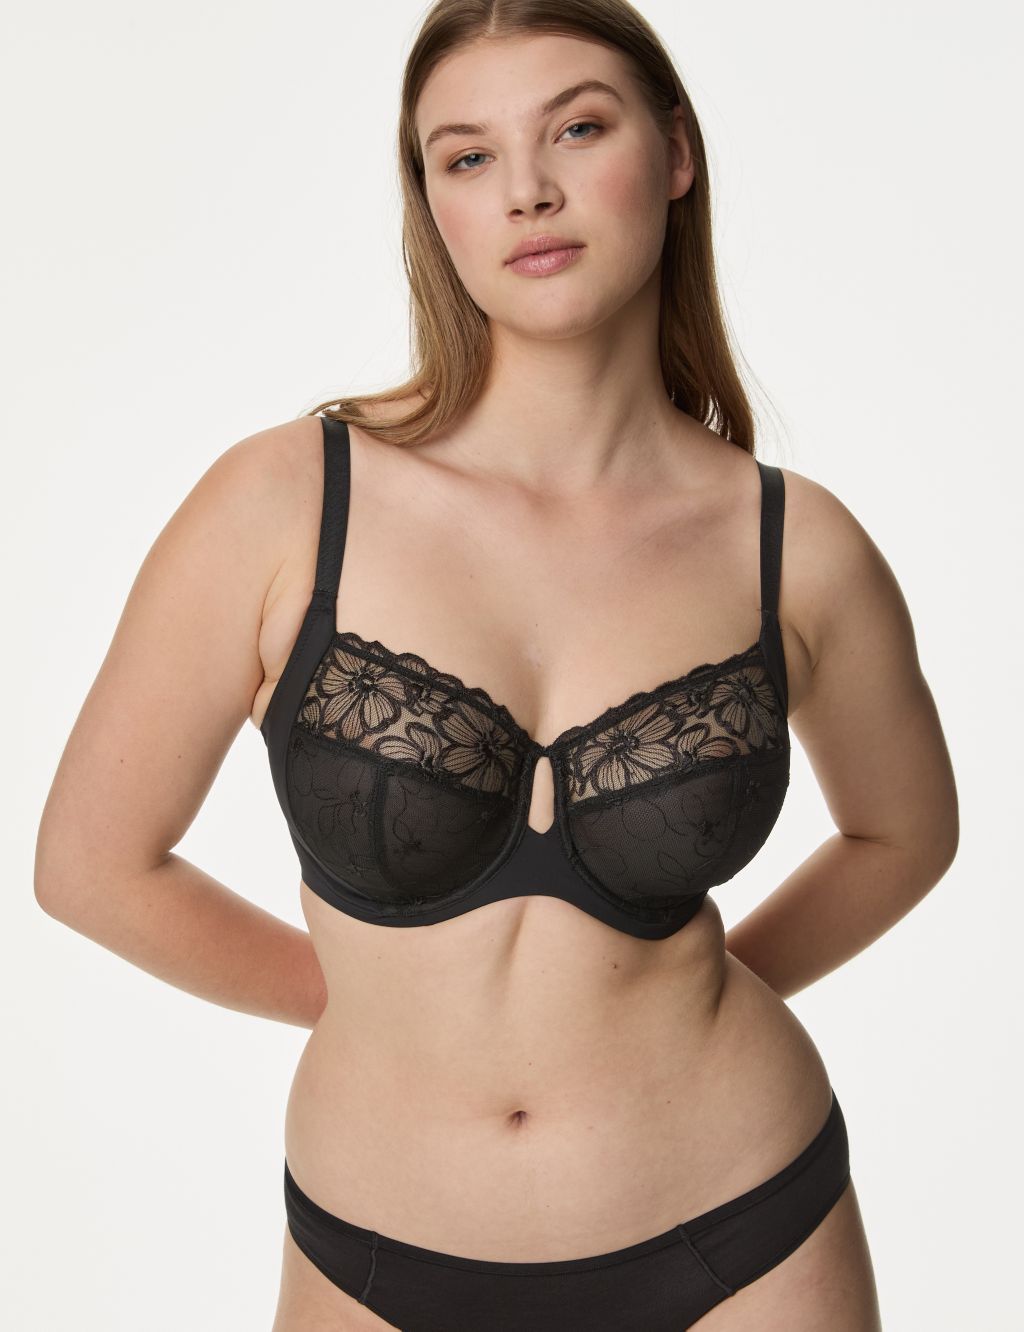 NEW! M&S Marks & Spencer black floral non-padded Maximum/Extra Support bra